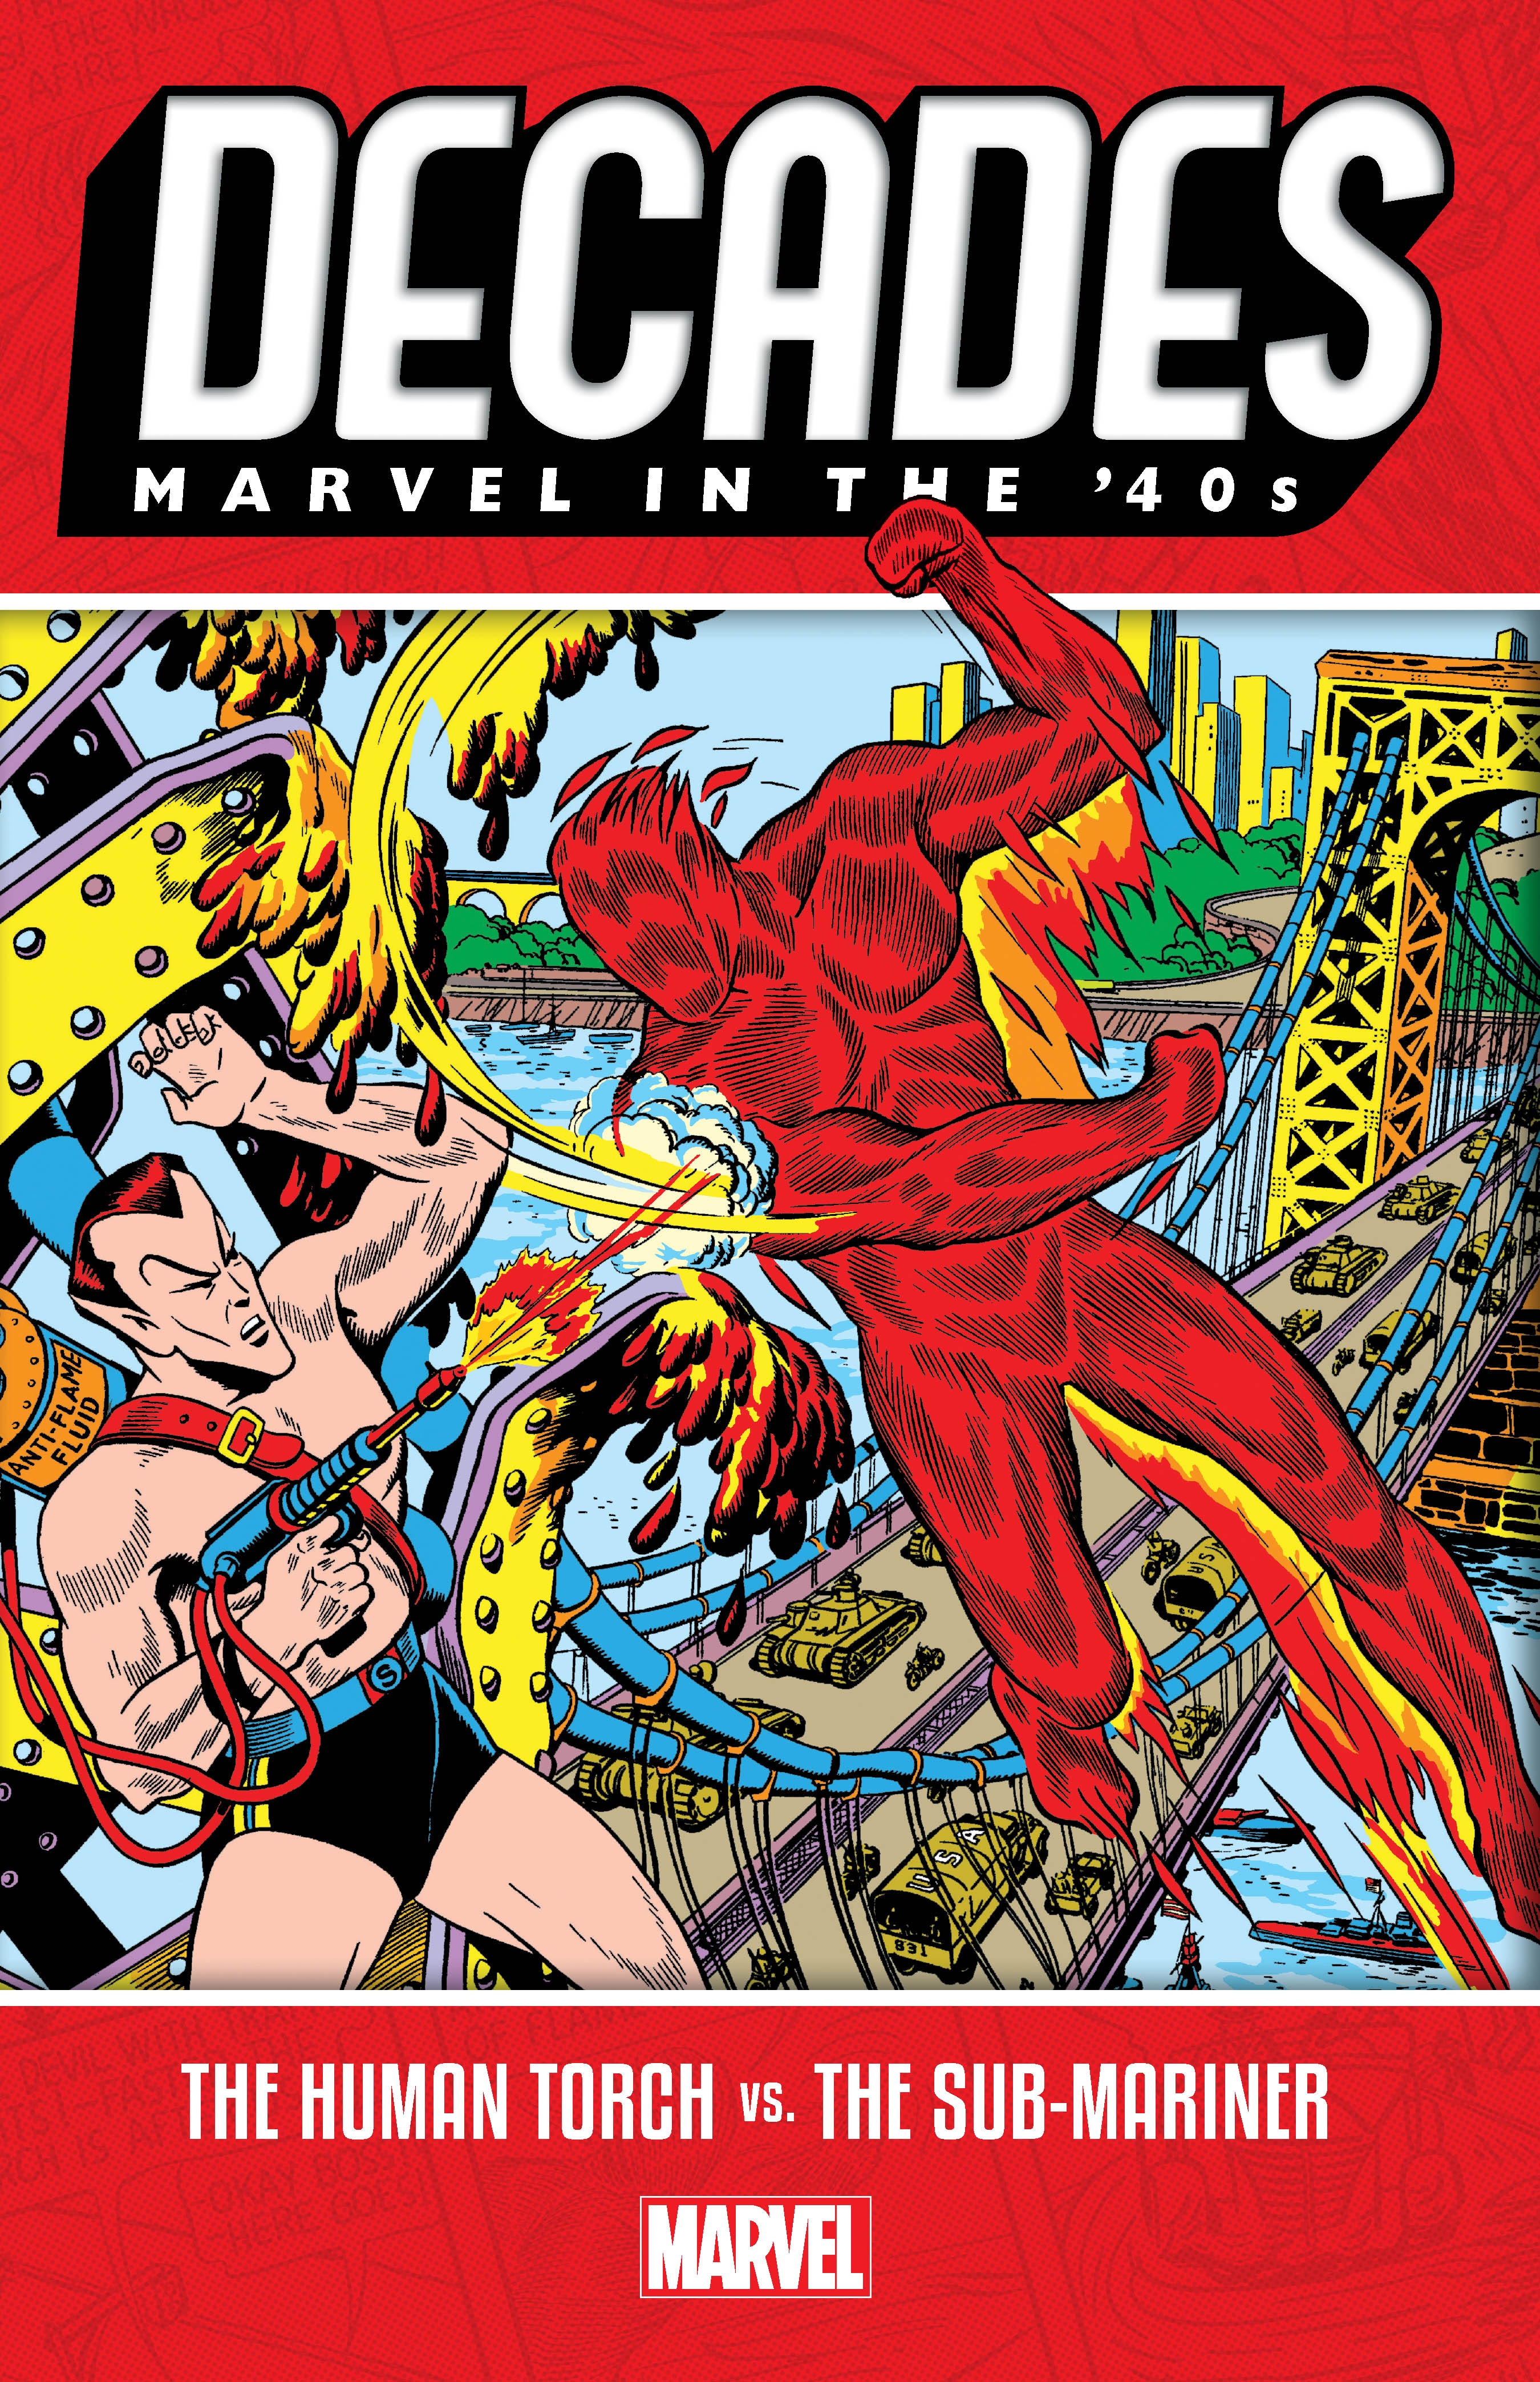 Decades: Marvel in The '40s - The Human Torch Vs. The Sub-Mariner (Trade Paperback)